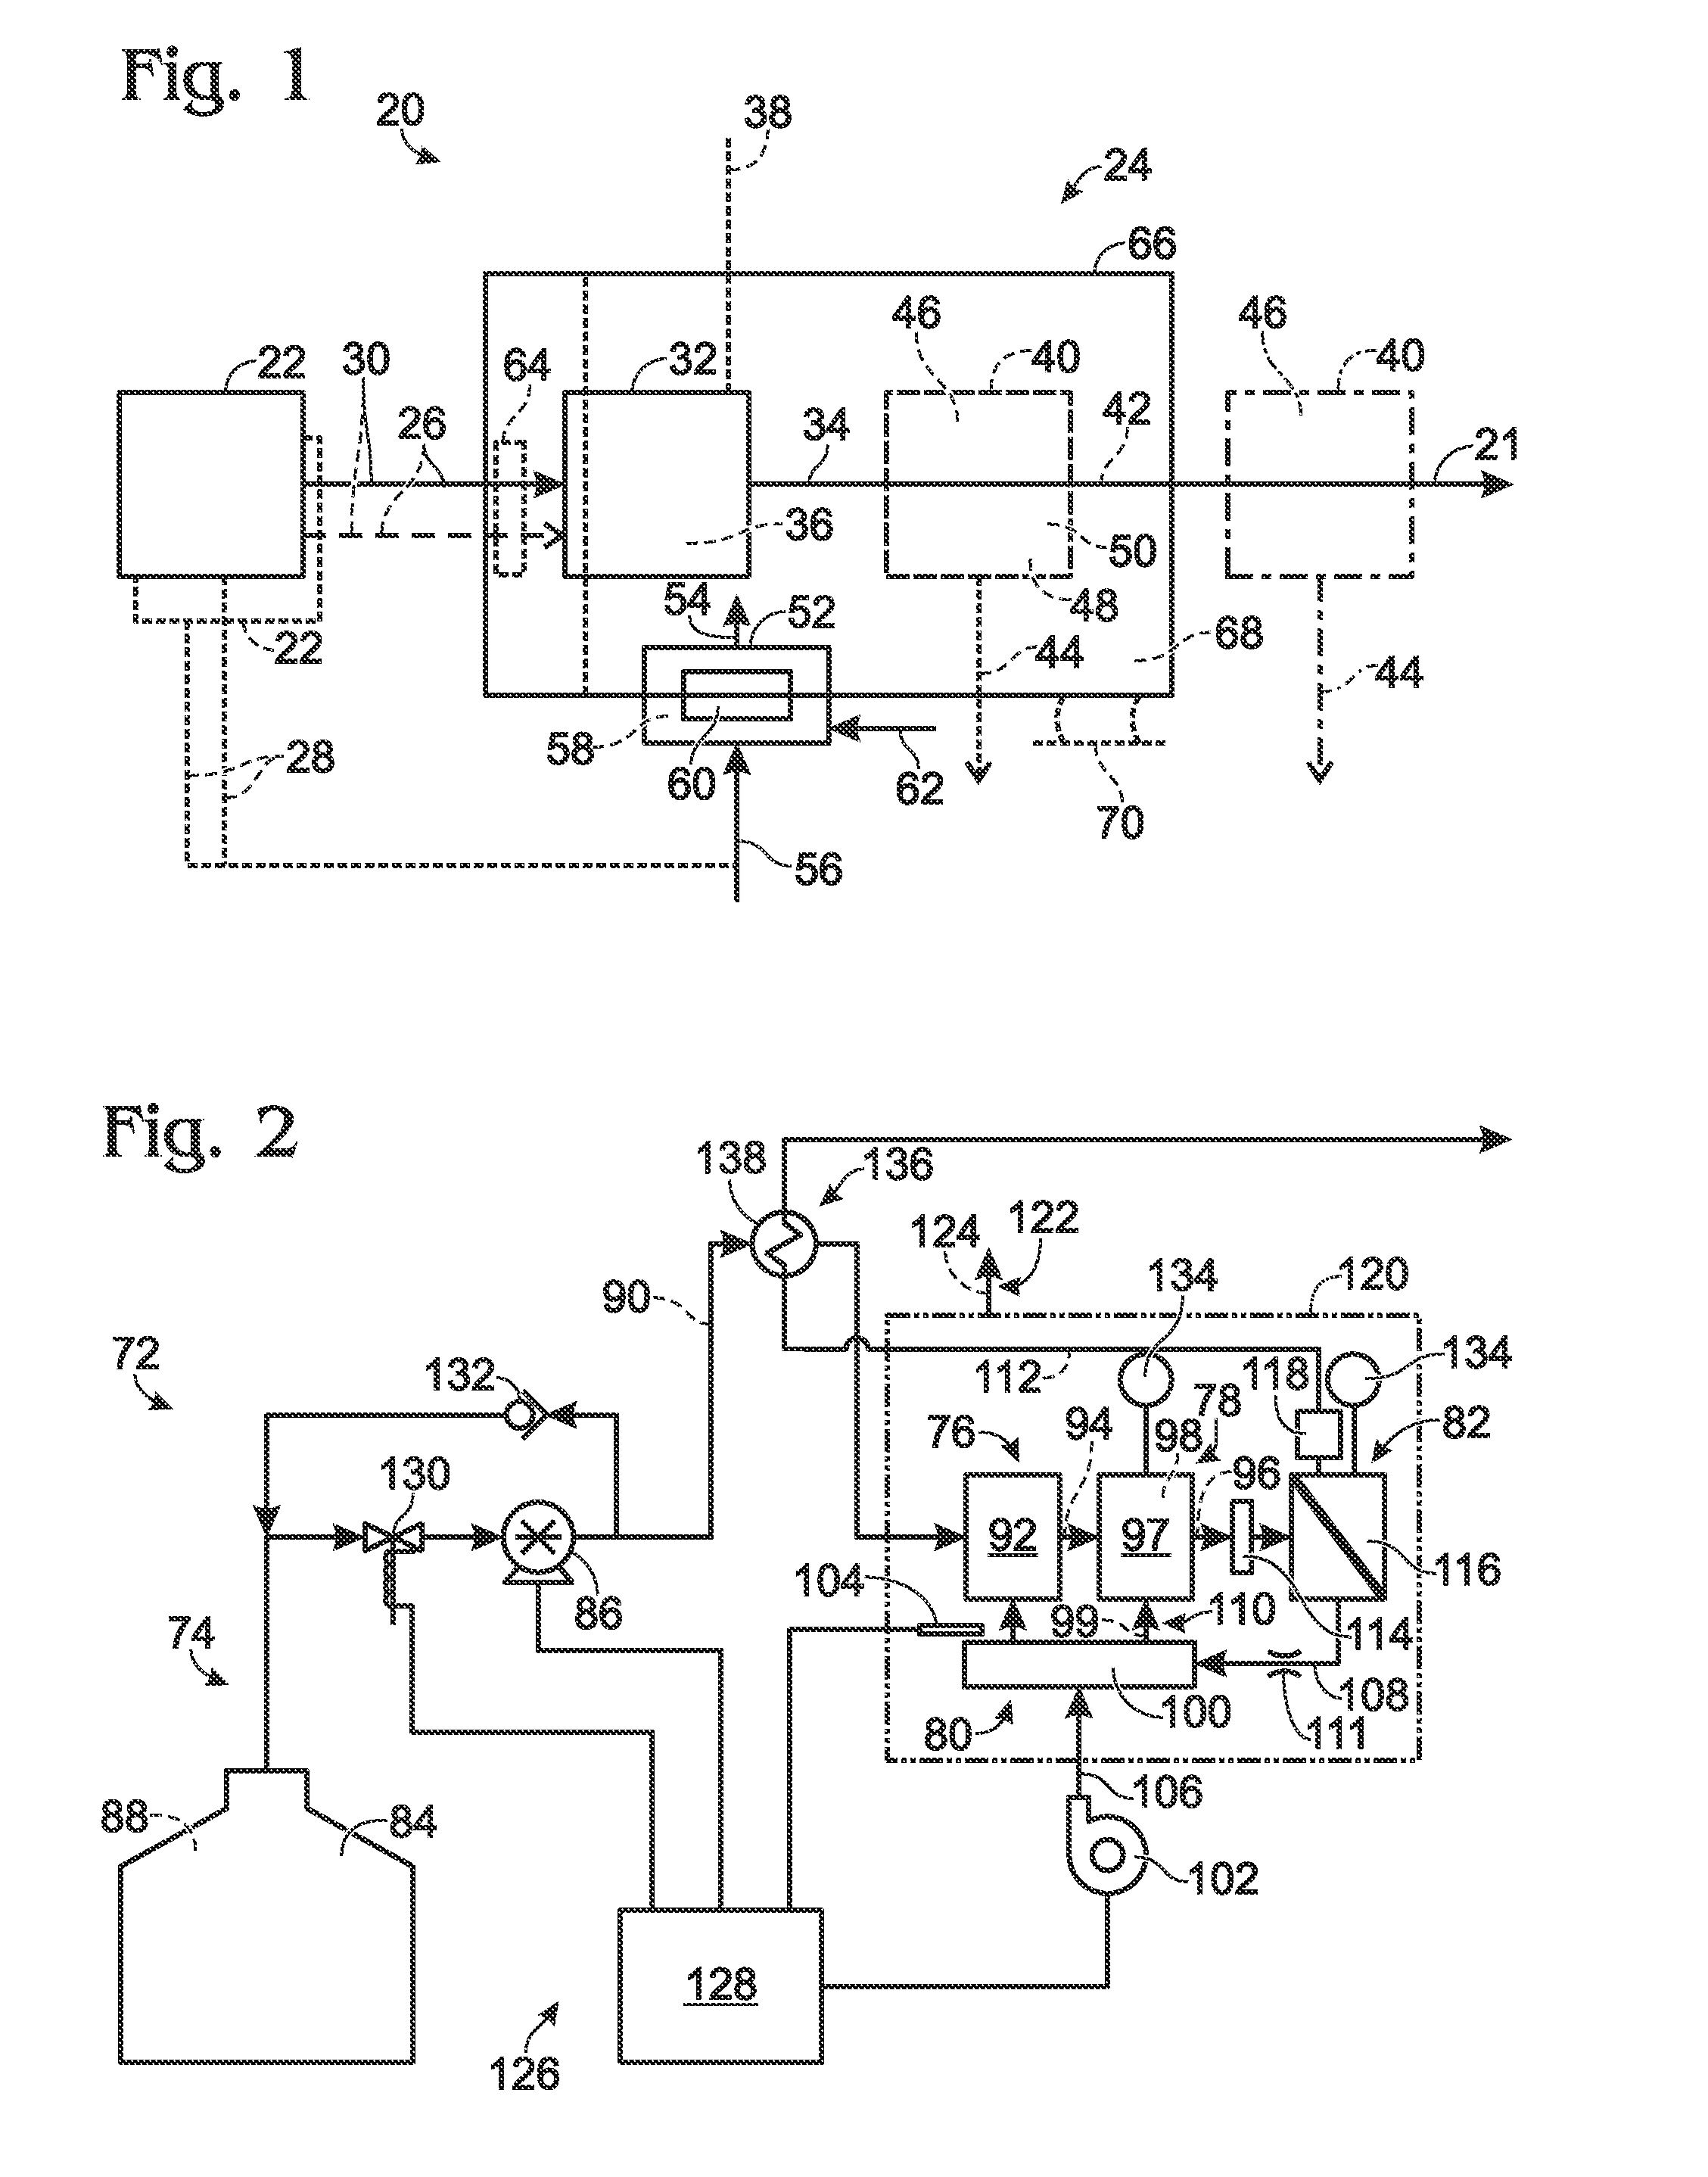 Hydrogen generation assemblies and hydrogen purification devices